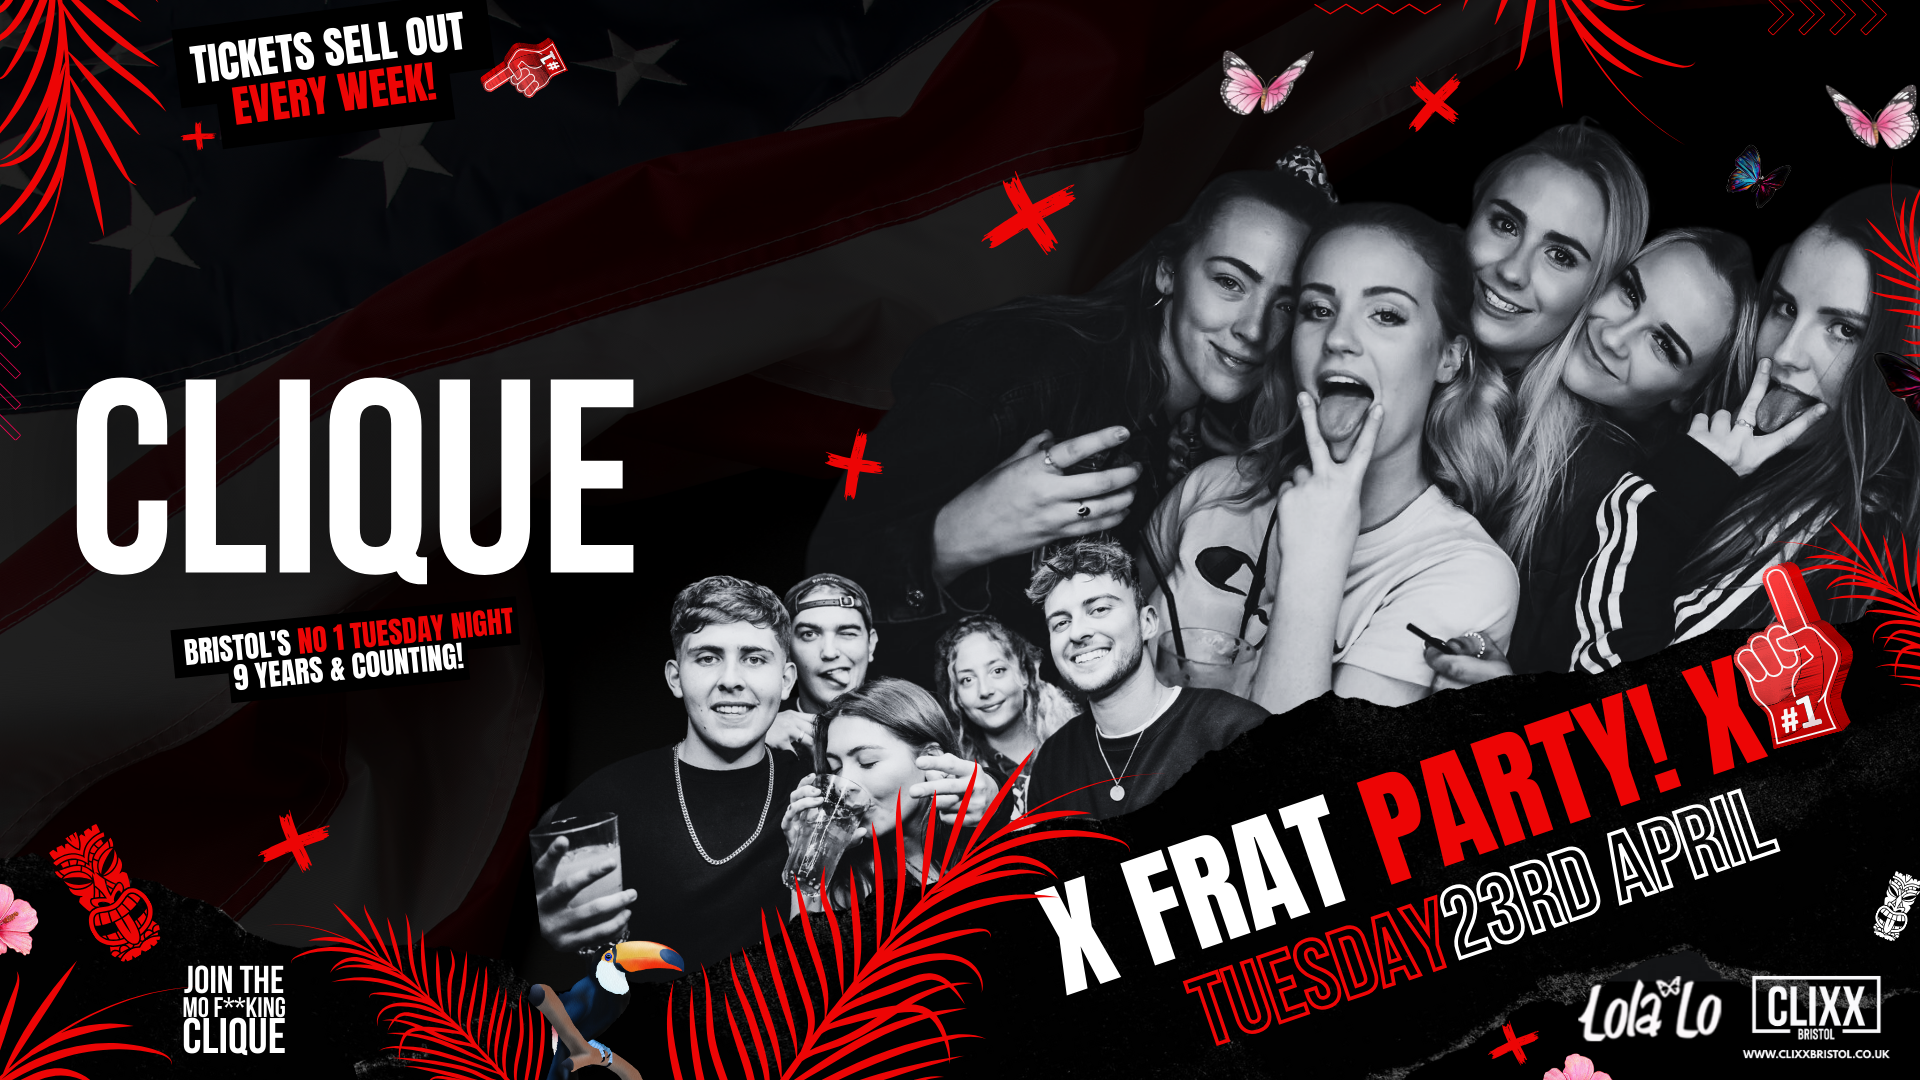 CLIQUE | X Frat Party X 🔥 Join The Mo F**king Clique